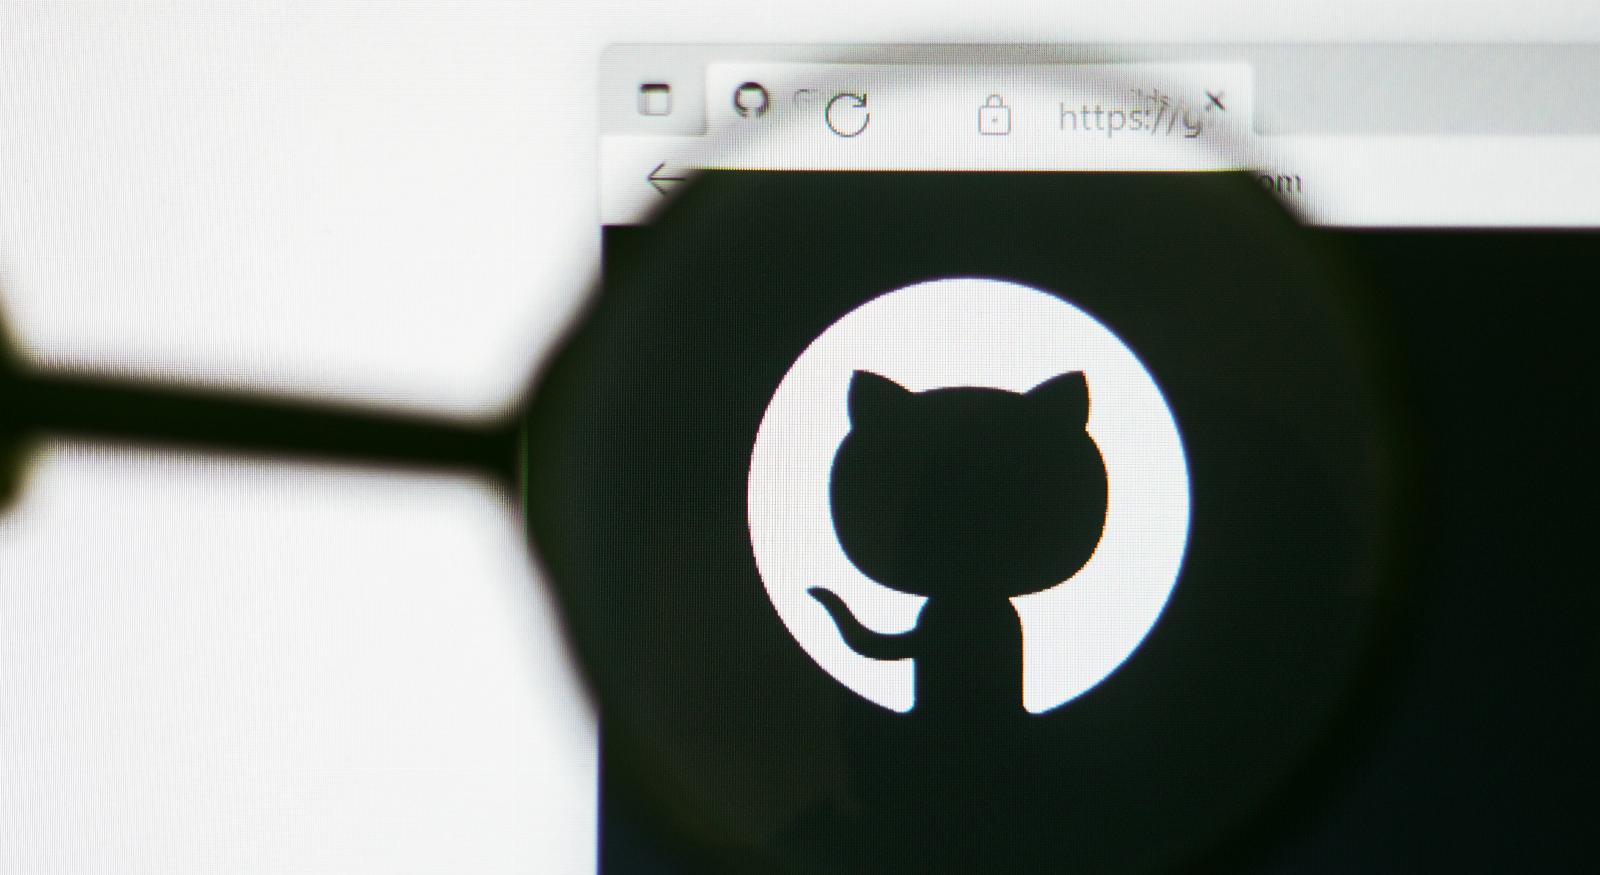 GitHub says it now has 100M active users